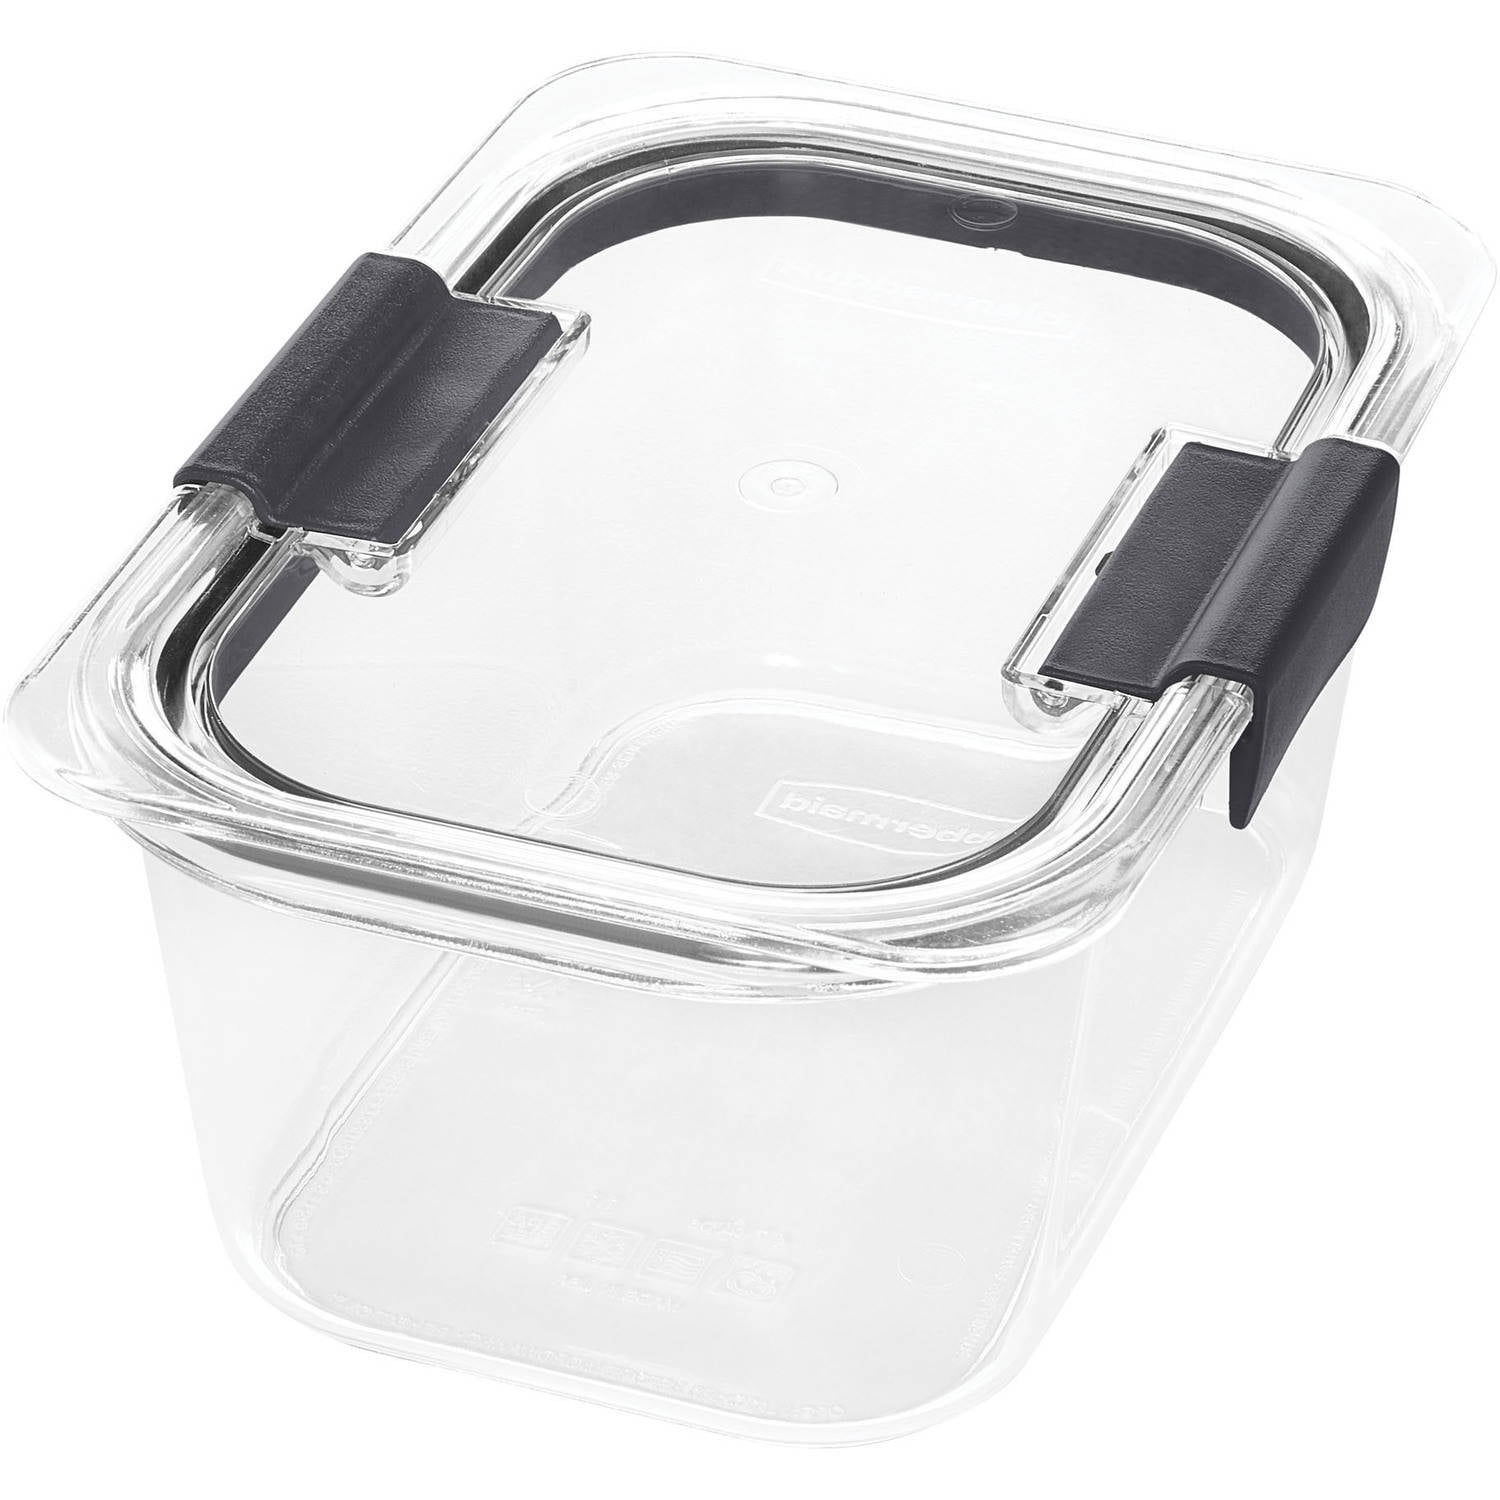 Rubbermaid® Brilliance Small Food Containers - Clear, 2 pk - City